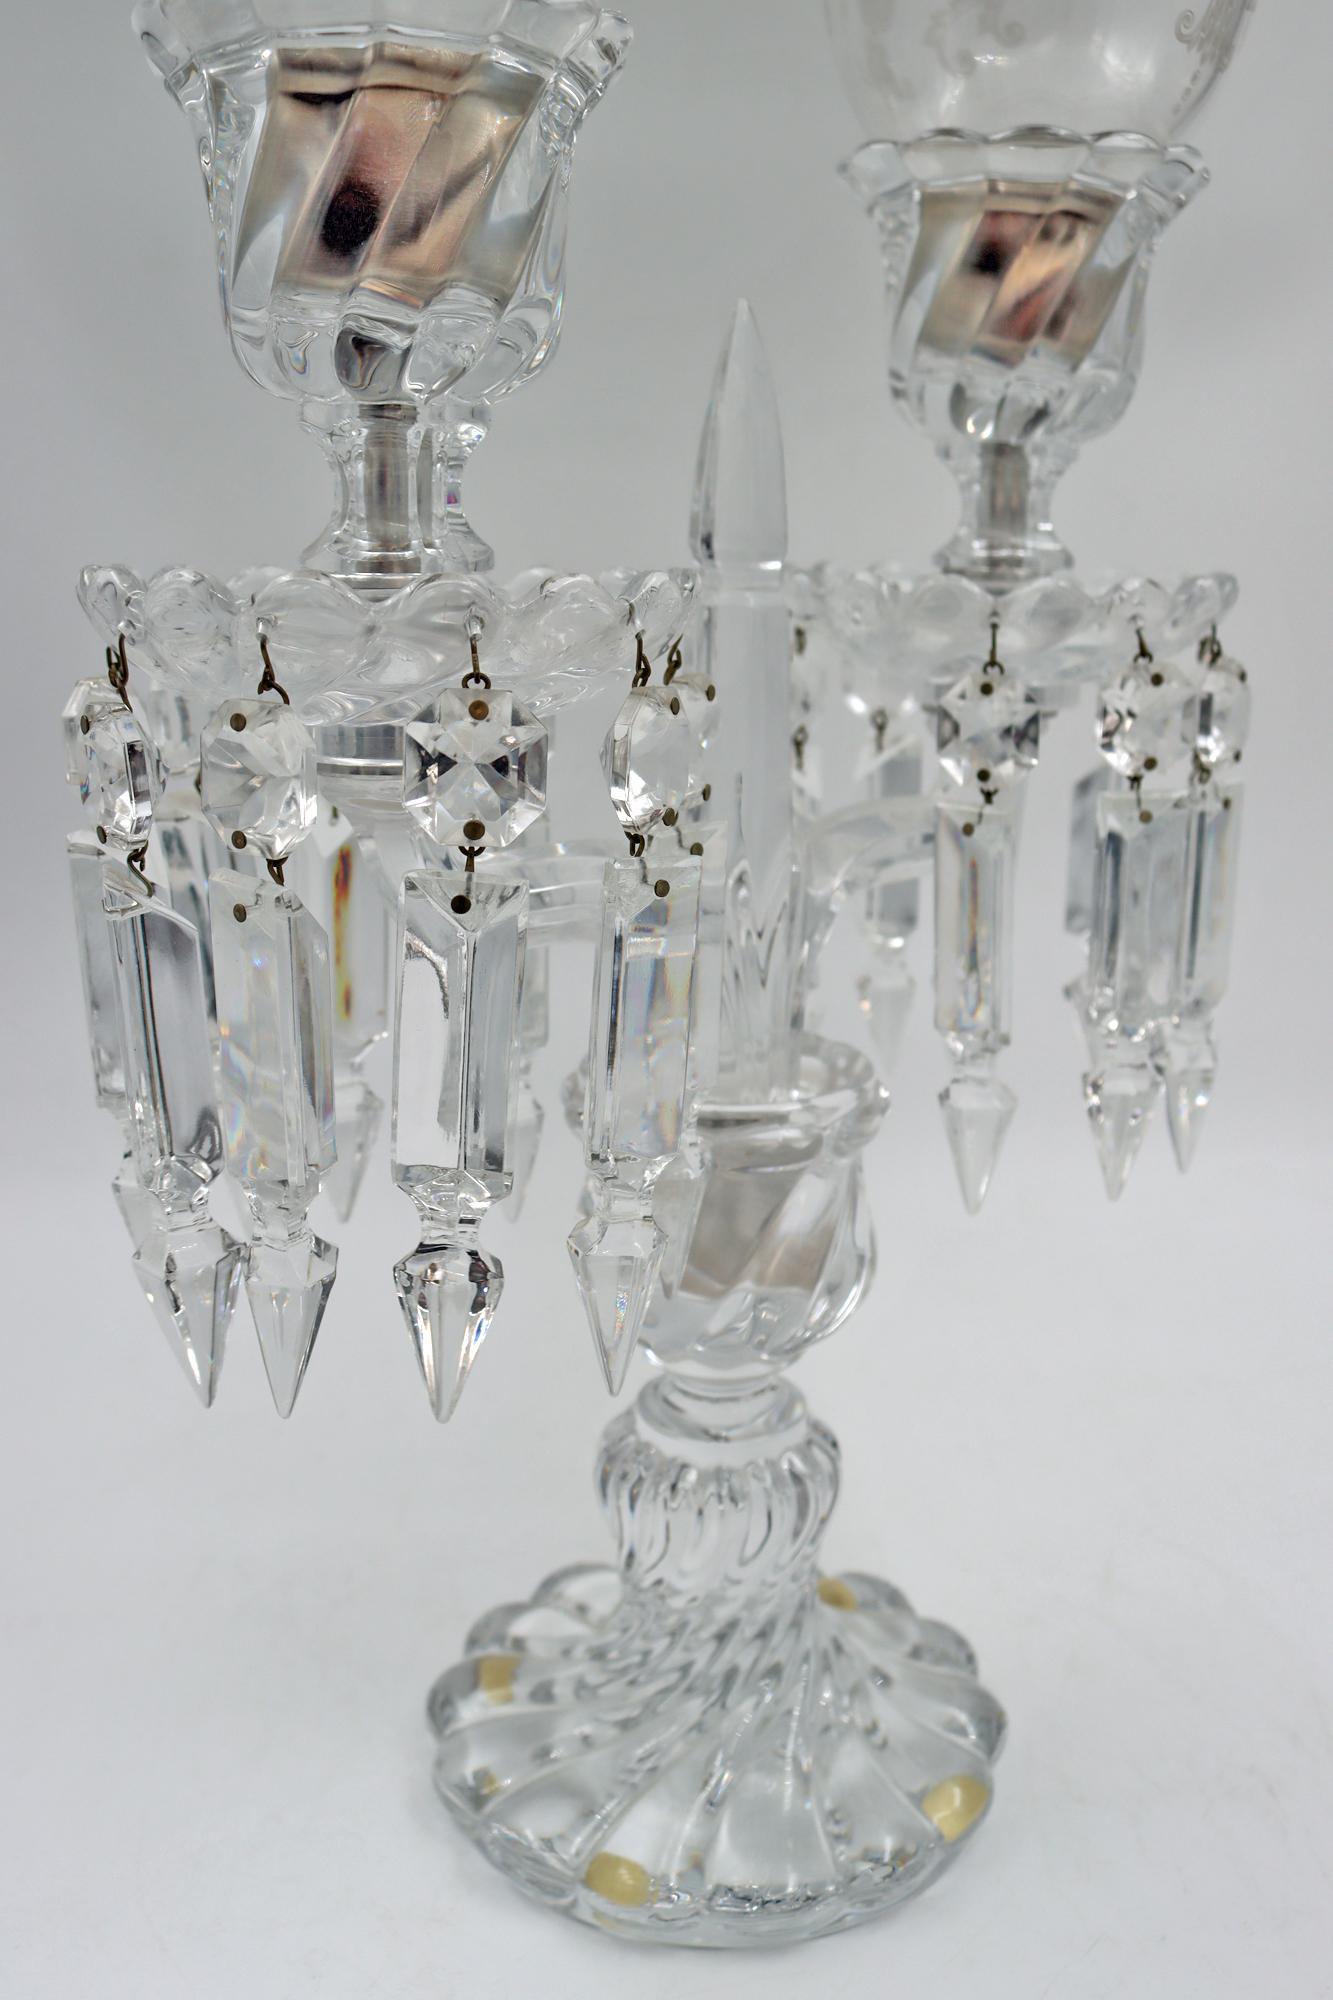 A pair of candelabras signed Baccarat, two Branches with its Baccarat photophores, 19th century, Napoleon III period.
Measures: H: 58 cm, W: 27 cm, D: 12 cm.